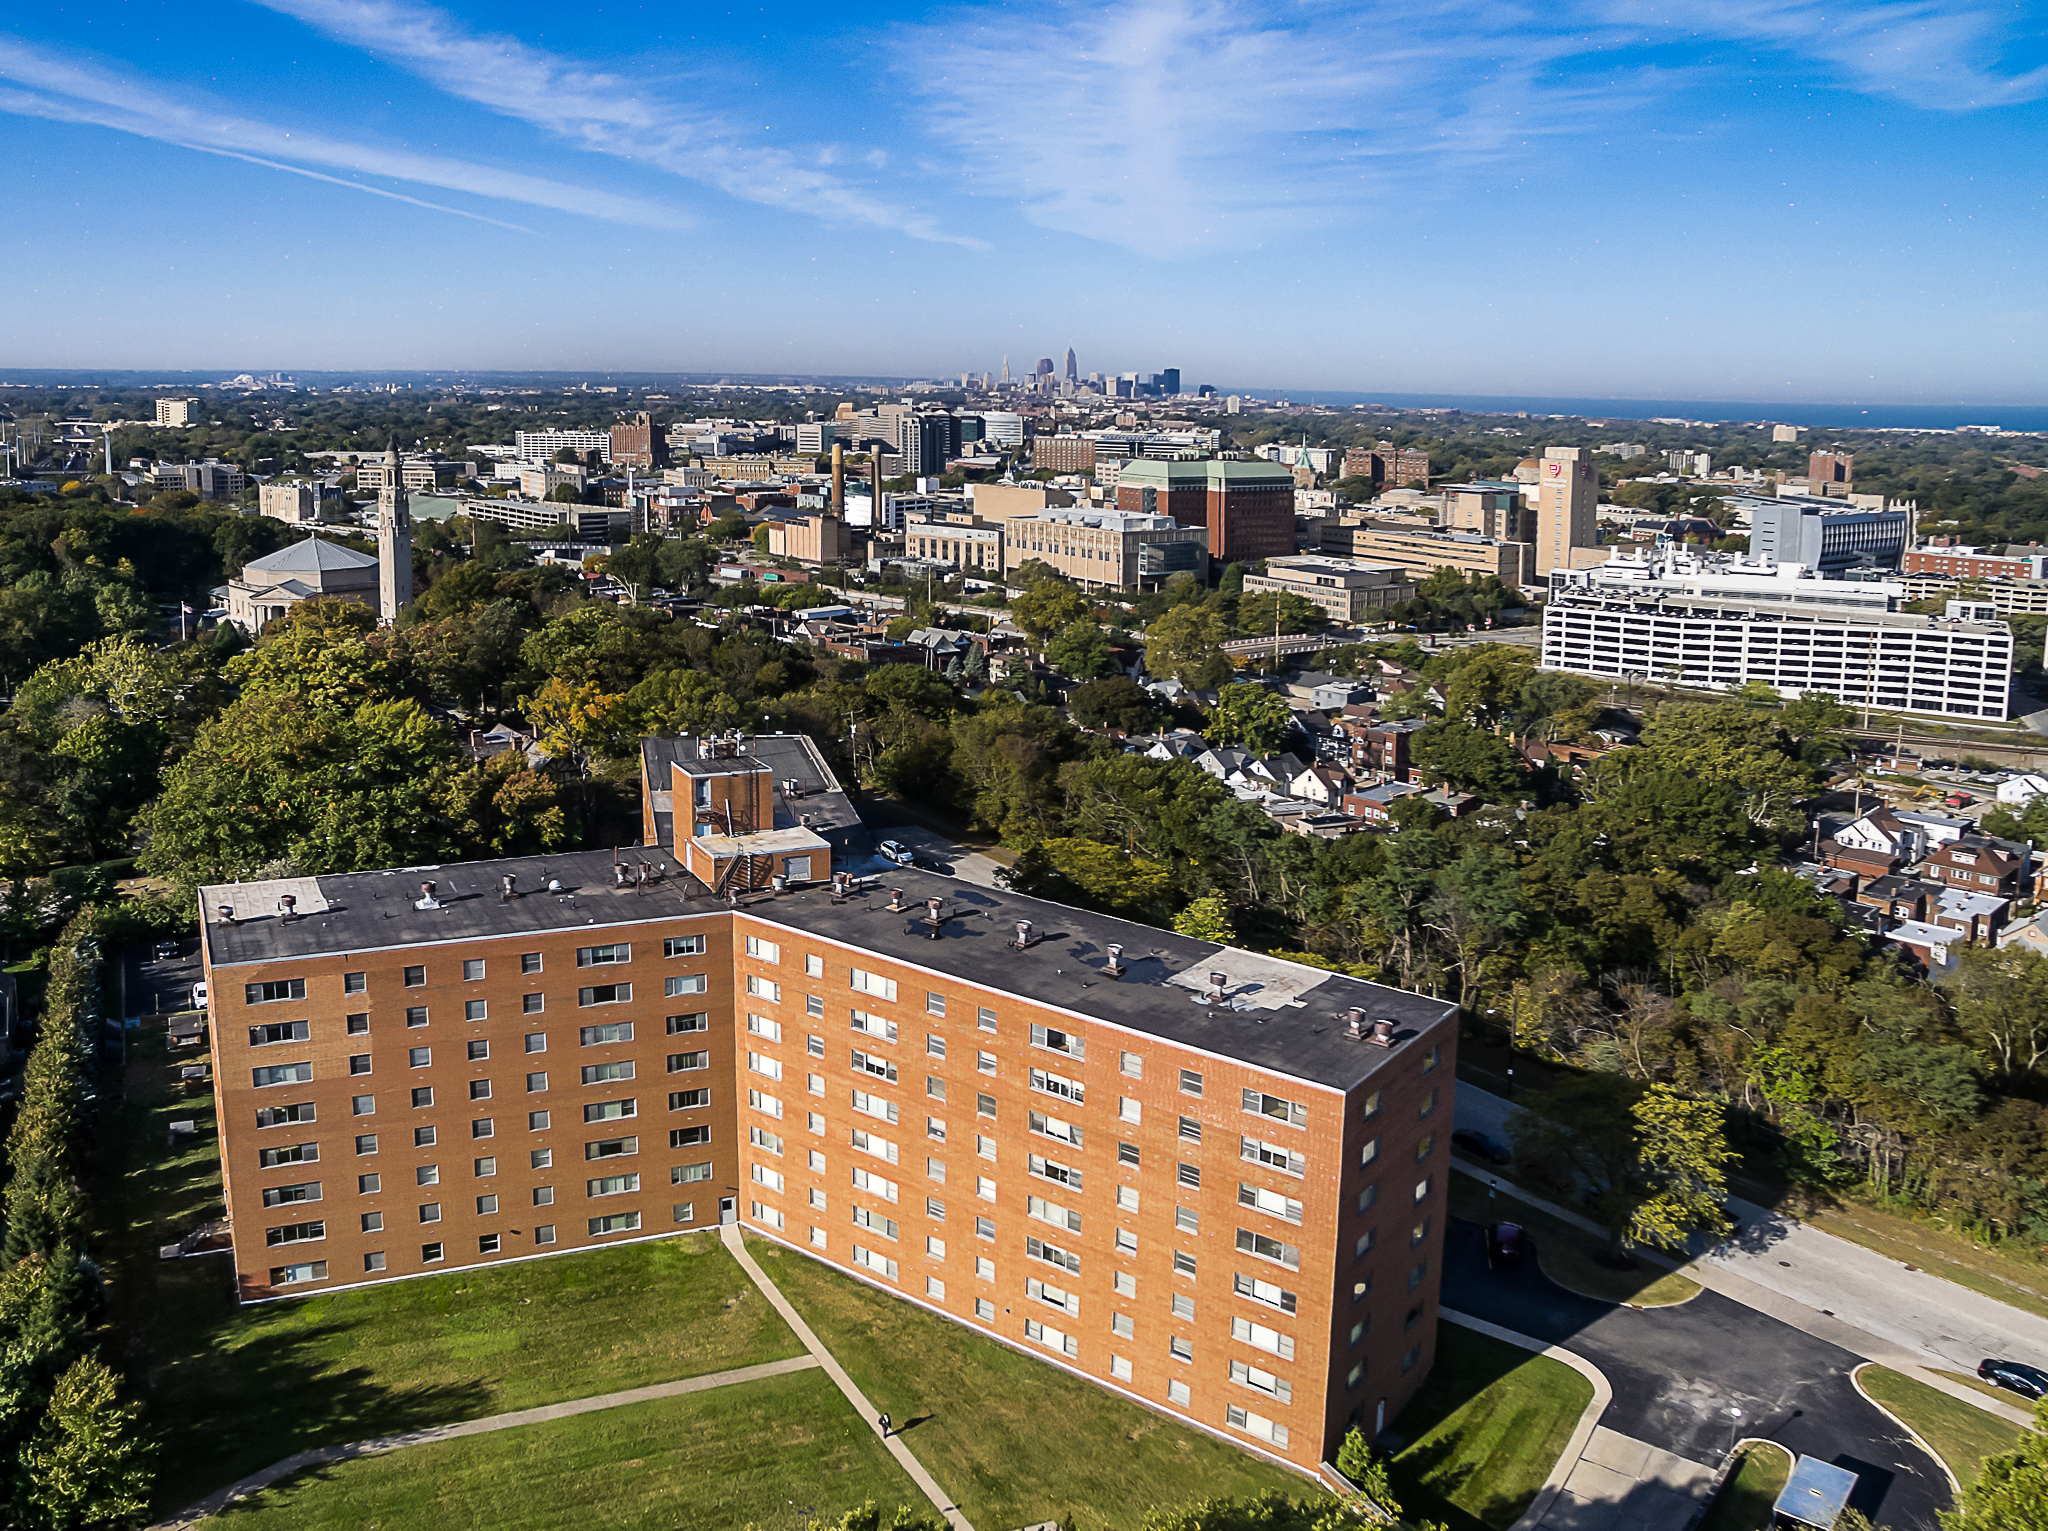 Aerial shot of Waldorf Towers in Cleveland Heights with a view of downtown Cleveland